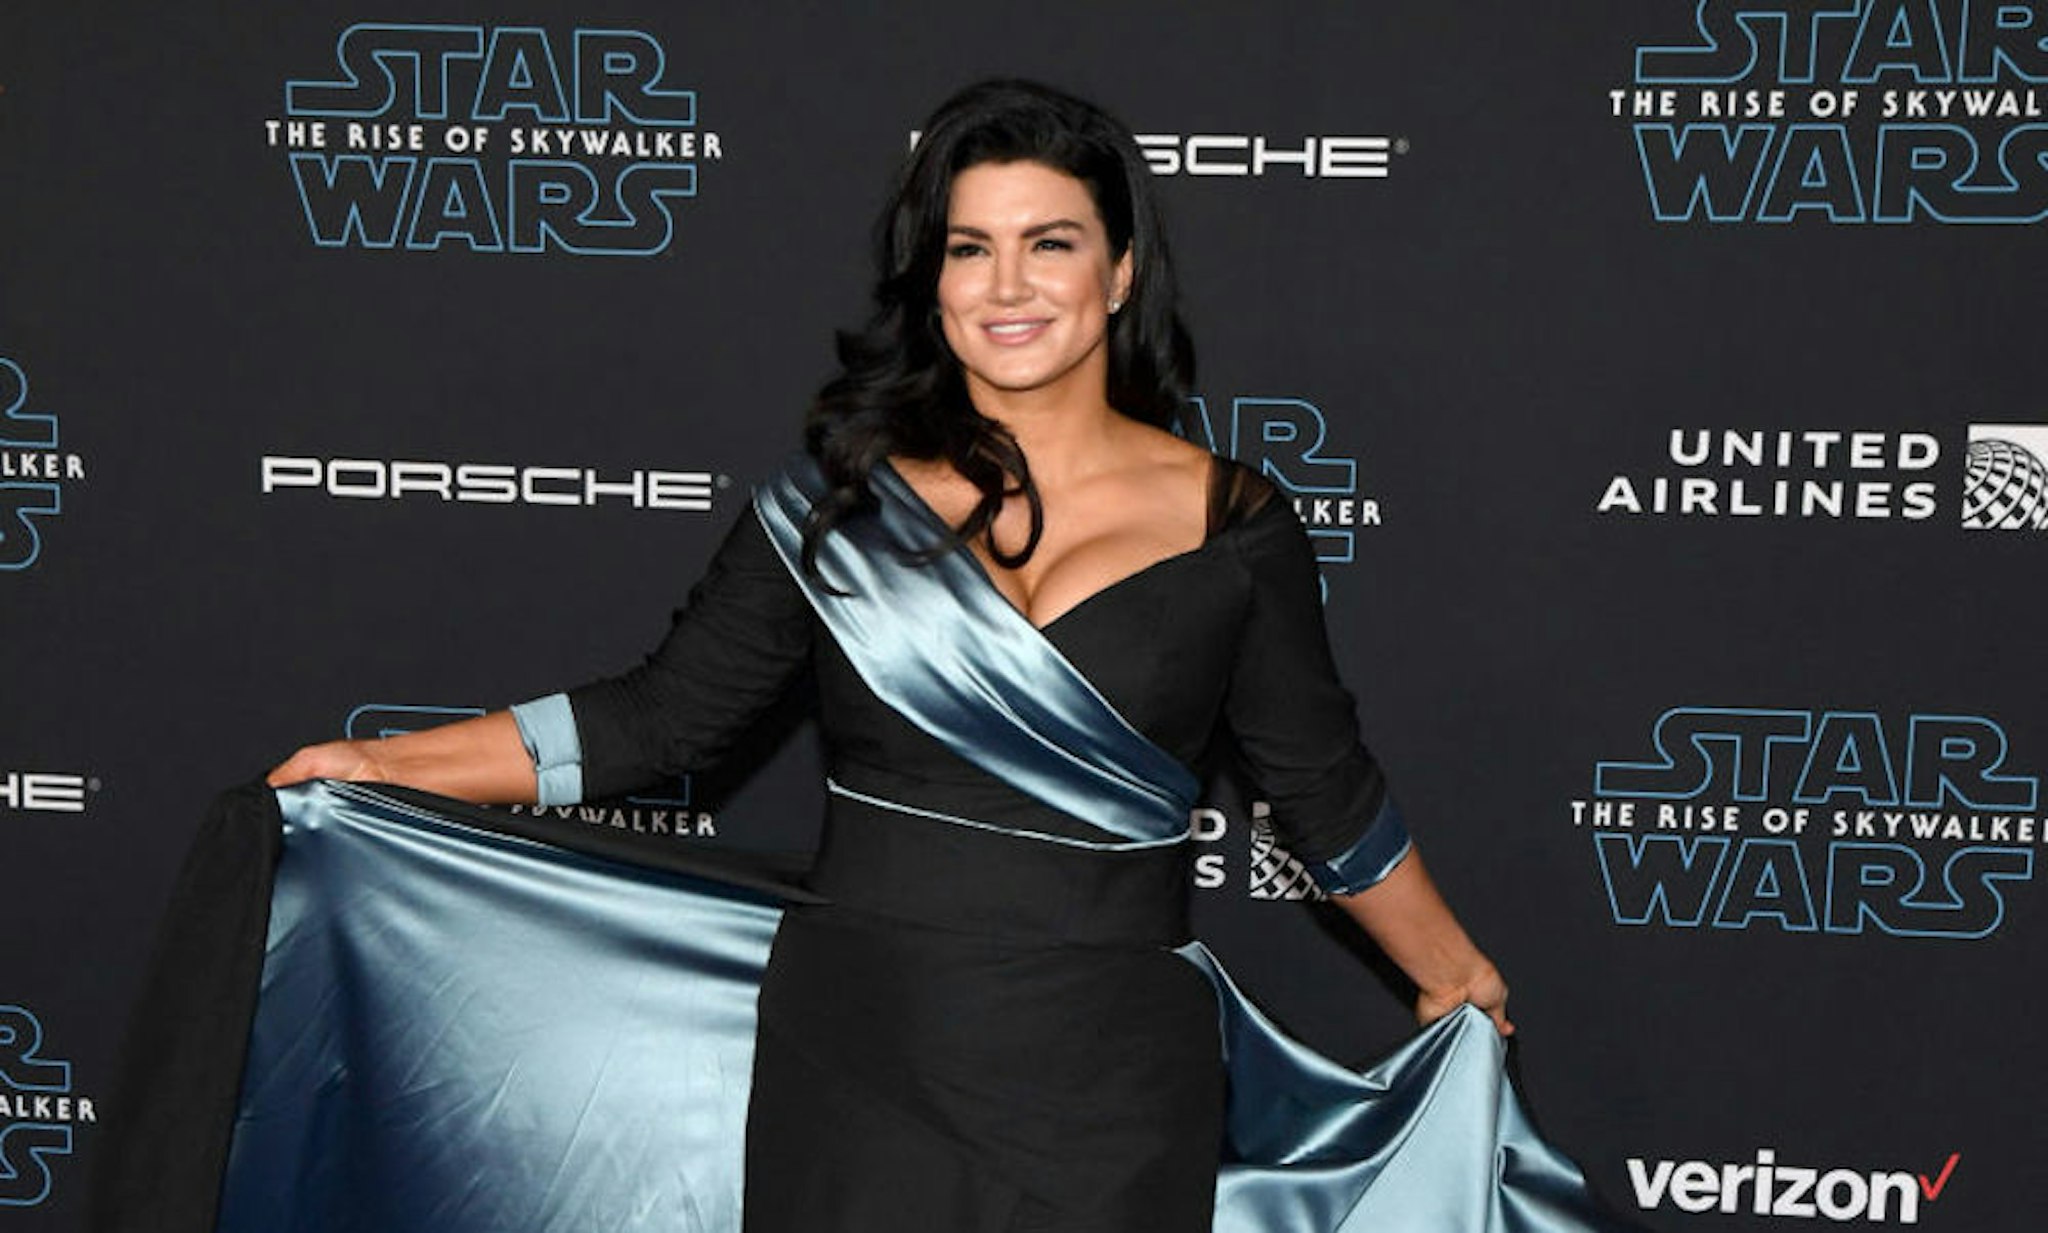 HOLLYWOOD, CALIFORNIA - DECEMBER 16: Actress Gina Carano attends the premiere of Disney's "Star Wars: The Rise of Skywalker" on December 16, 2019 in Hollywood, California. (Photo by Ethan Miller/FilmMagic)